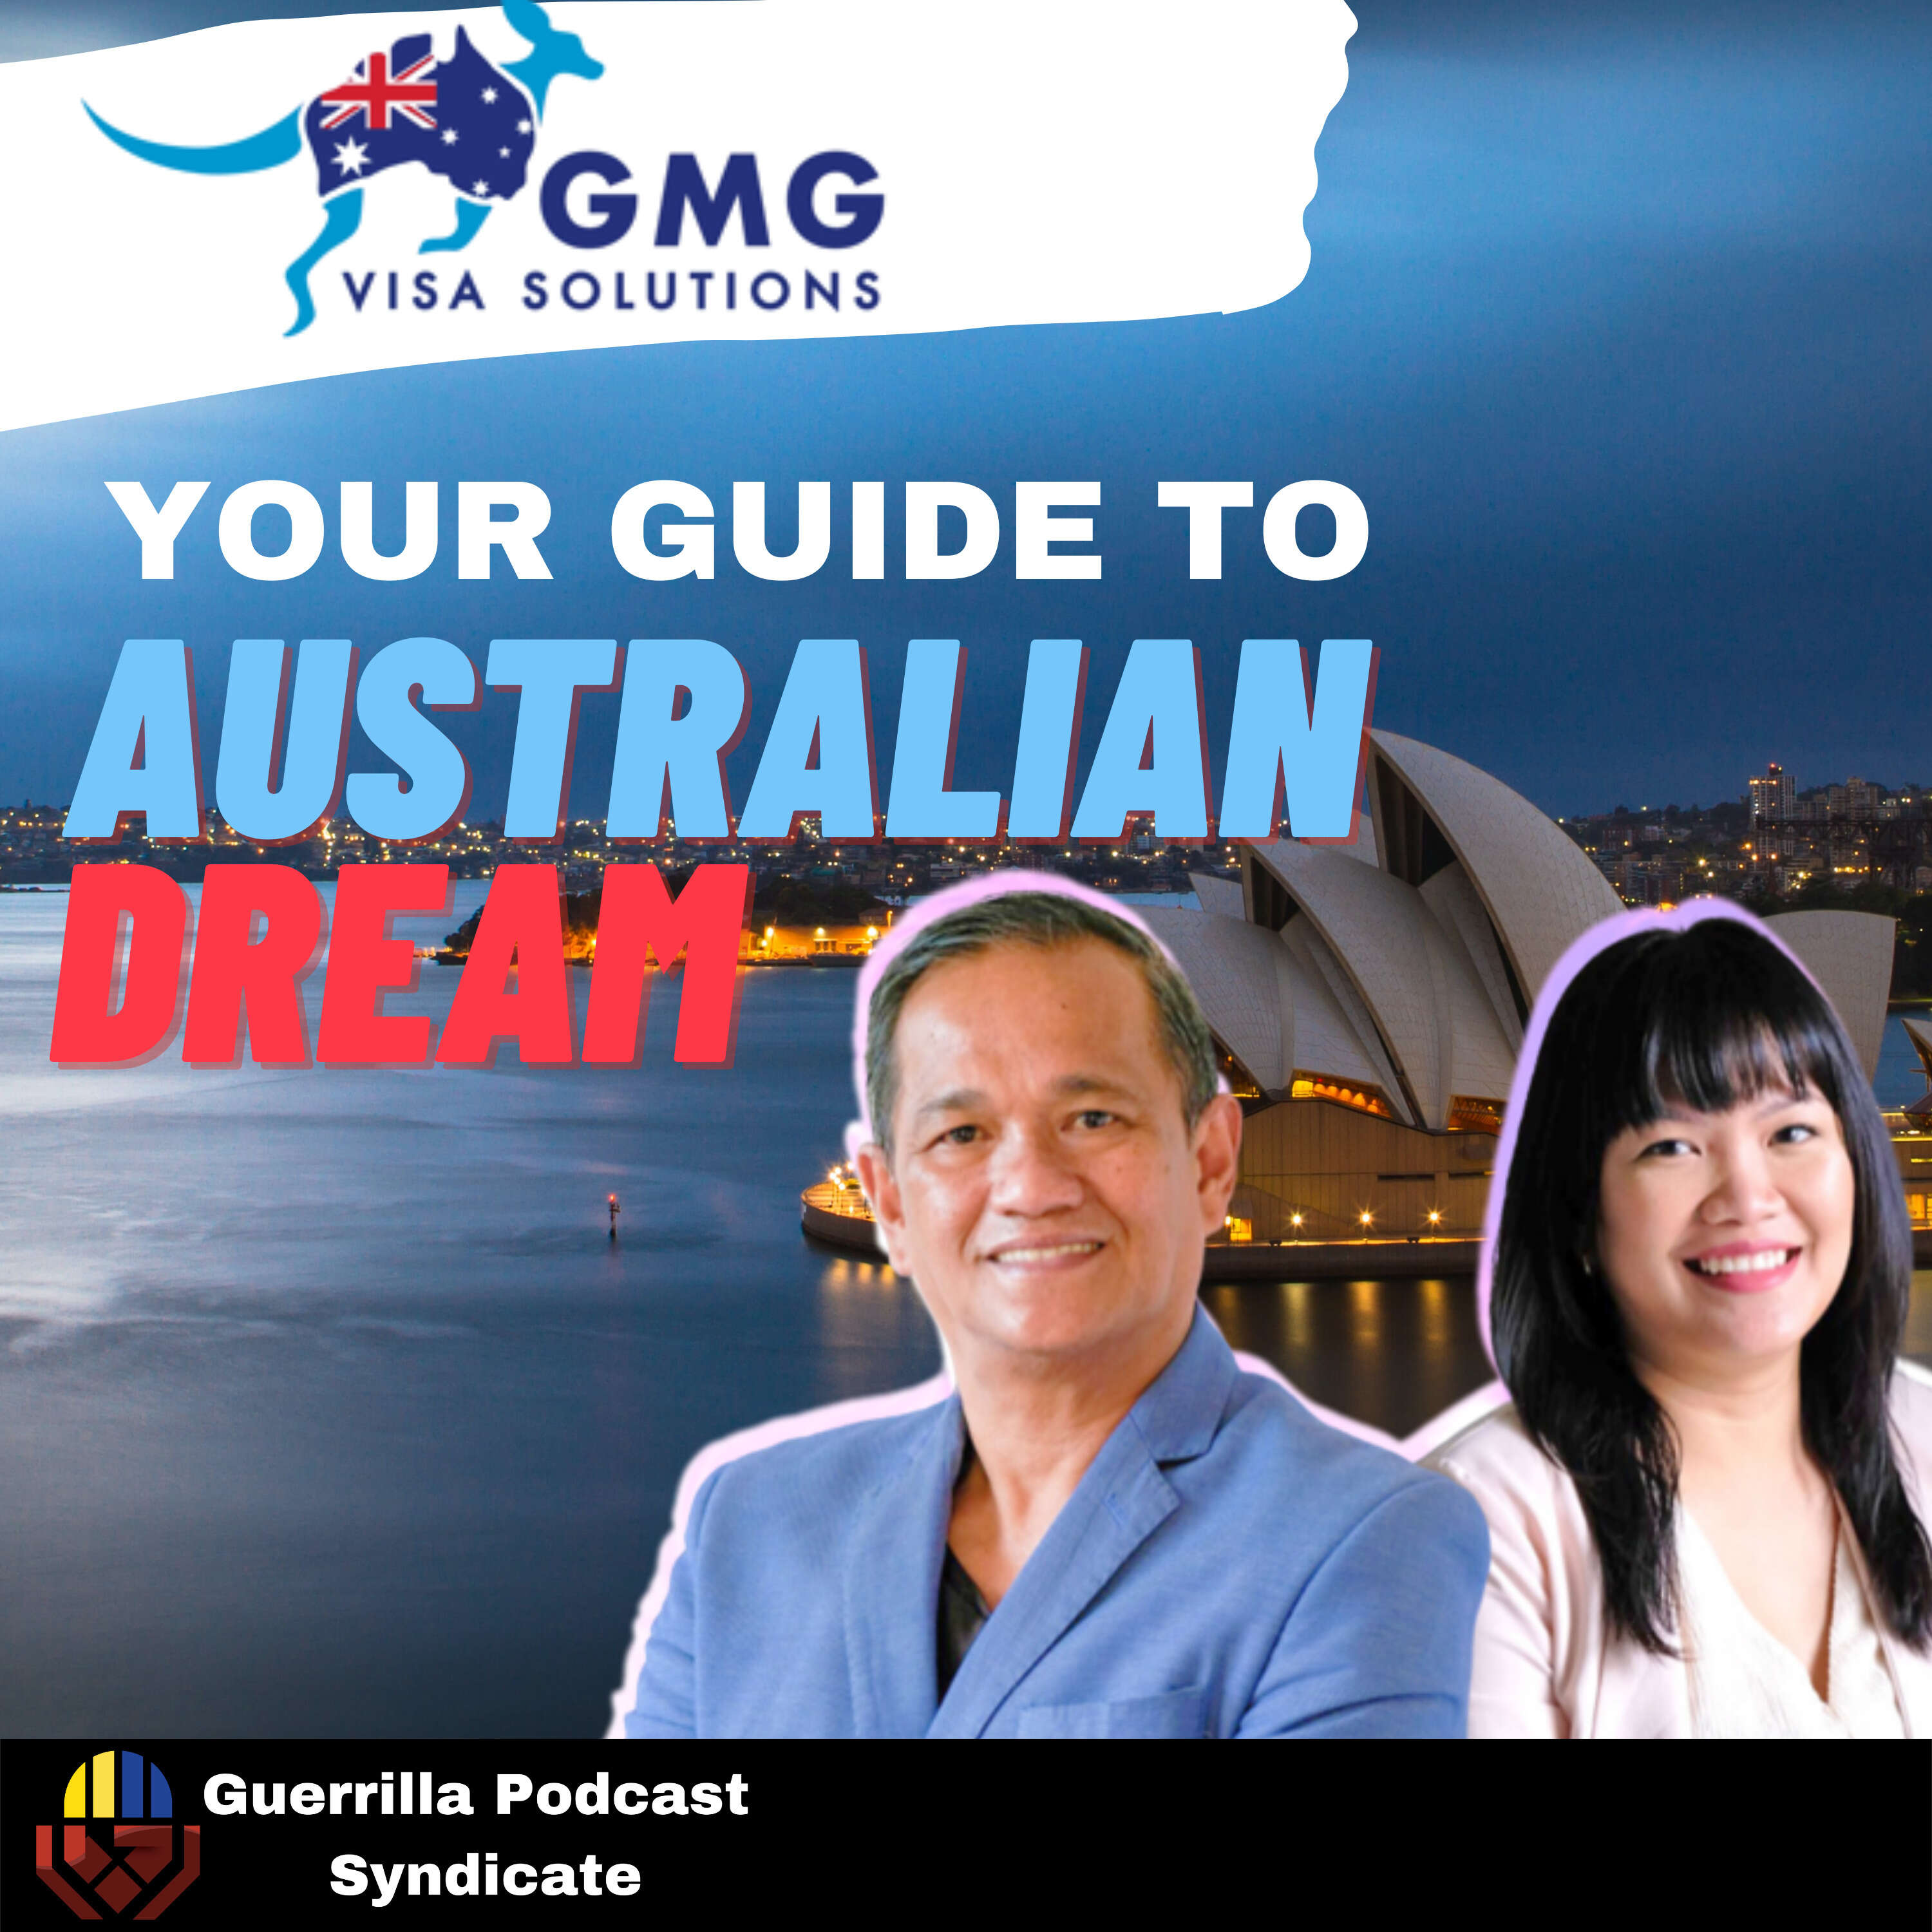 Your Guide to Australian Dream